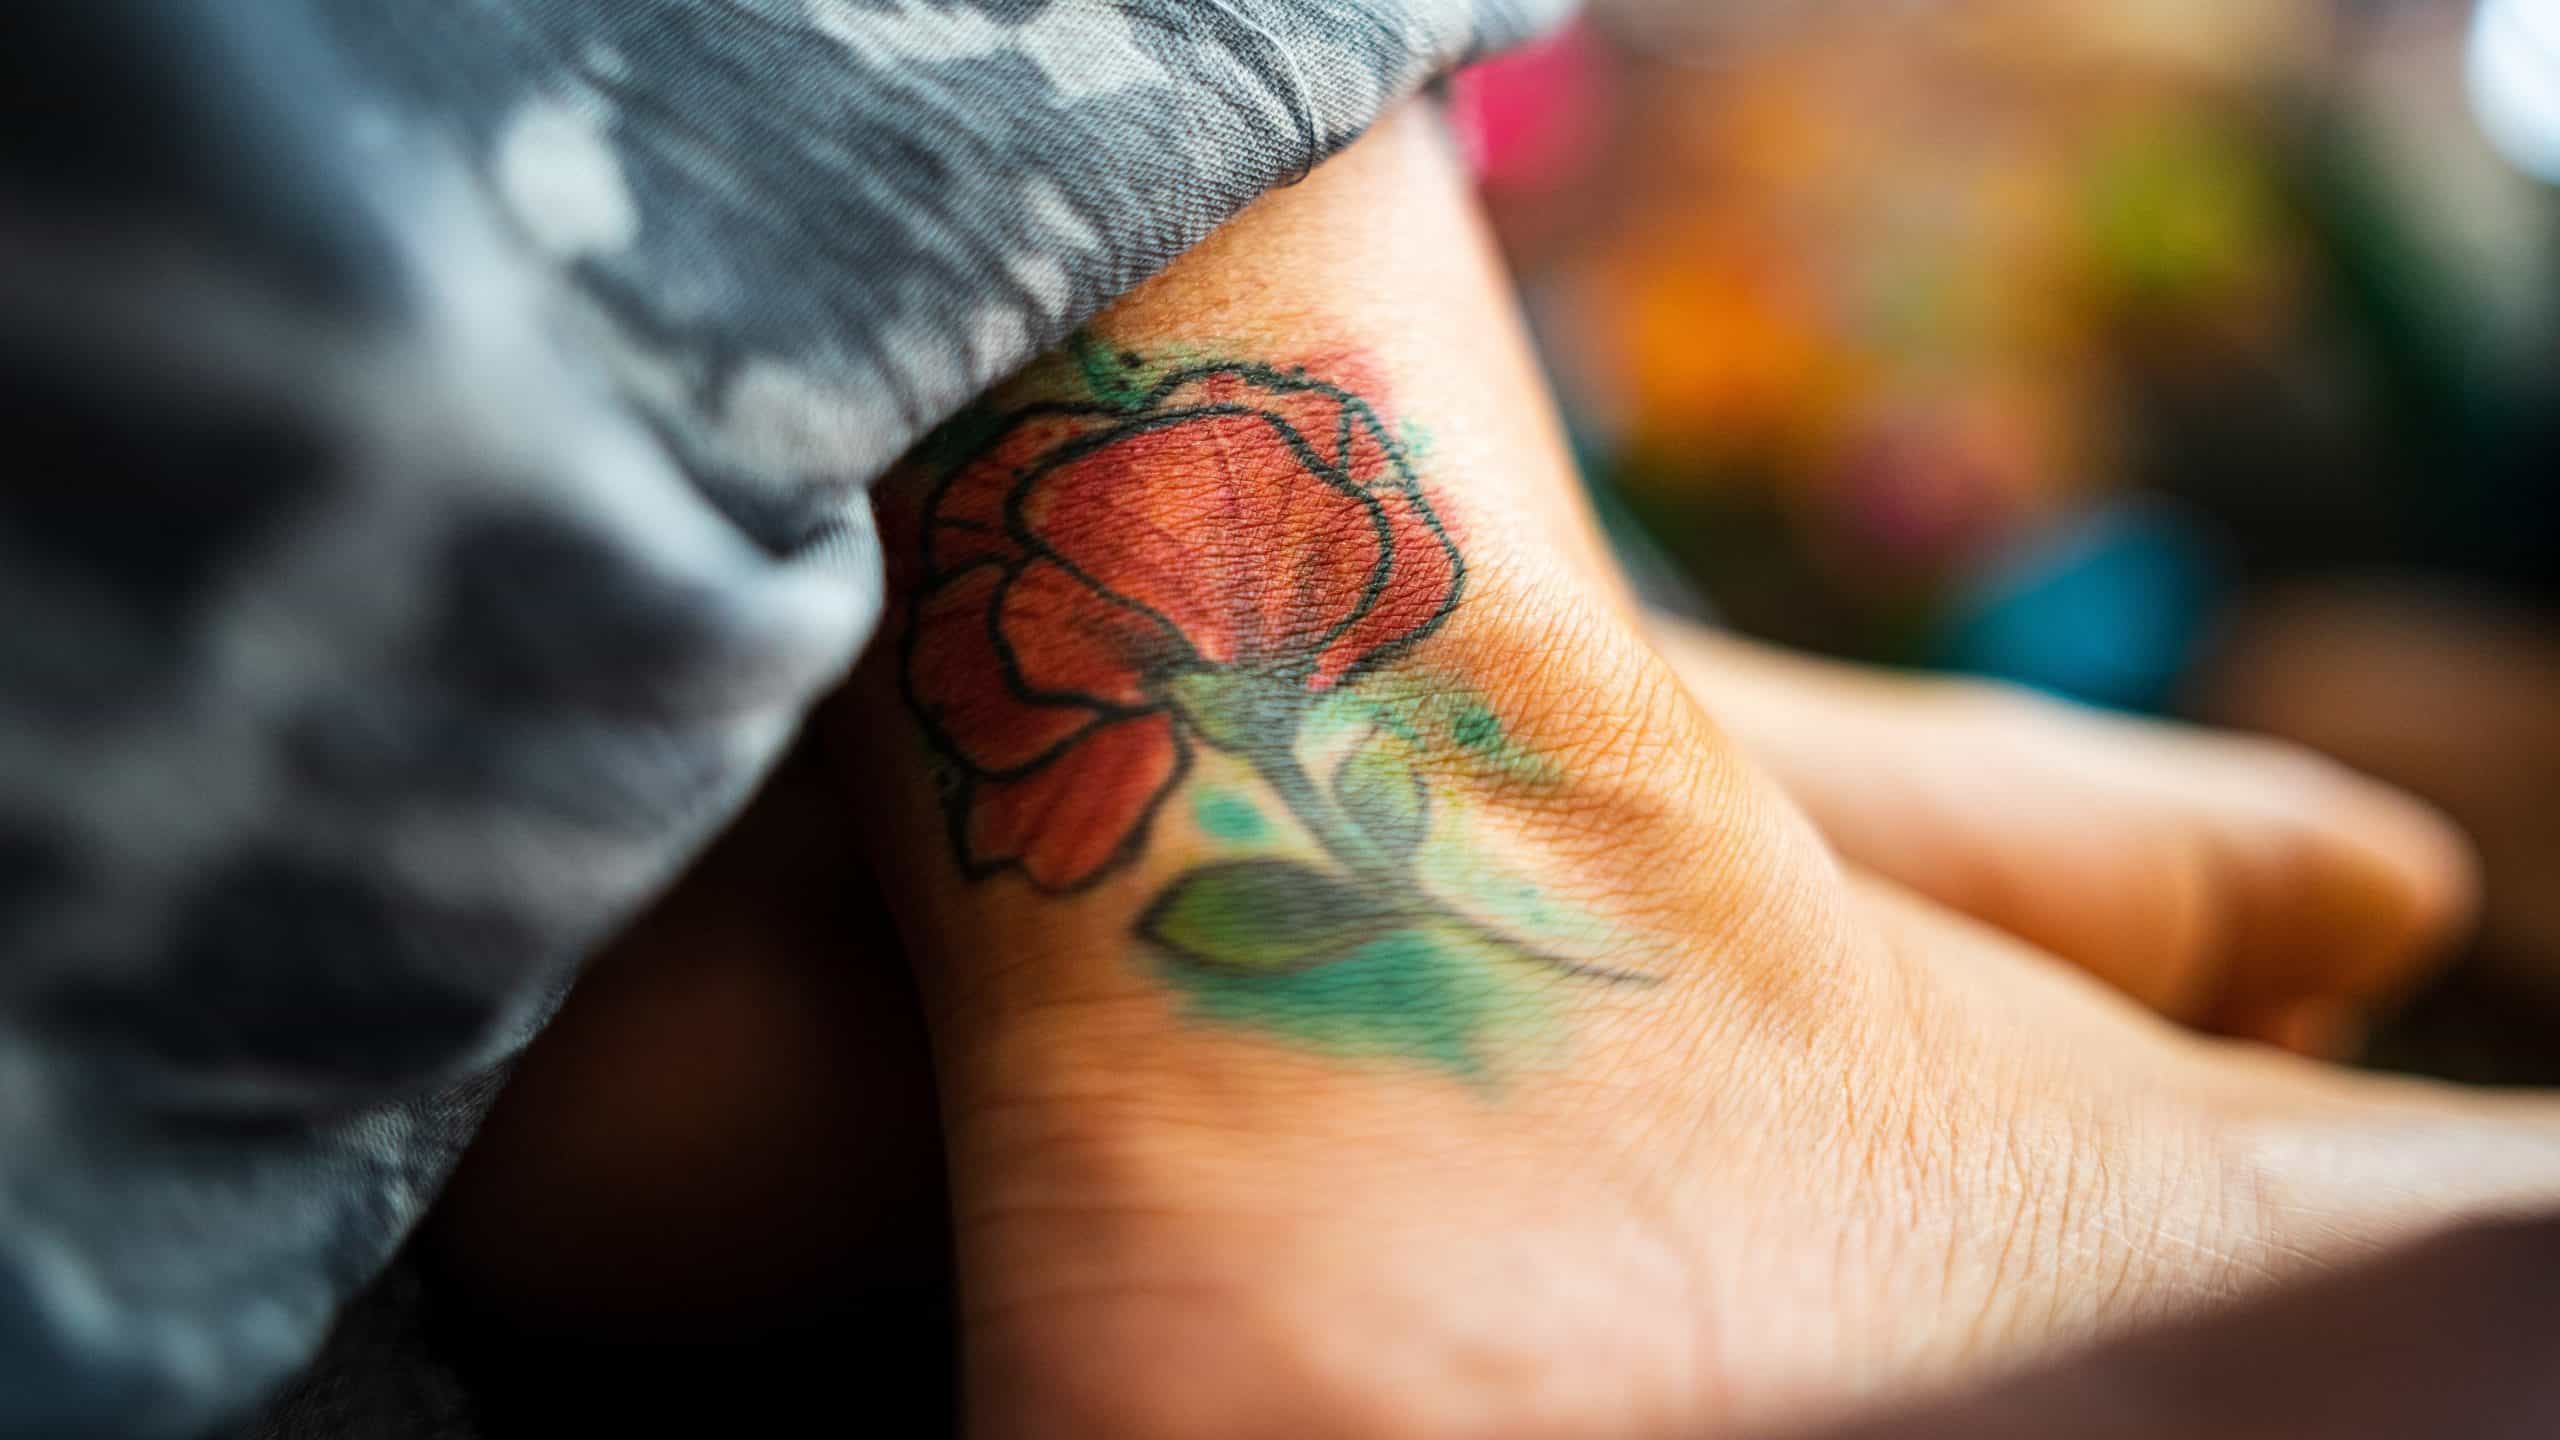 How Bad Do Ankle Tattoos Hurt and Should I Get One? - InkedMind